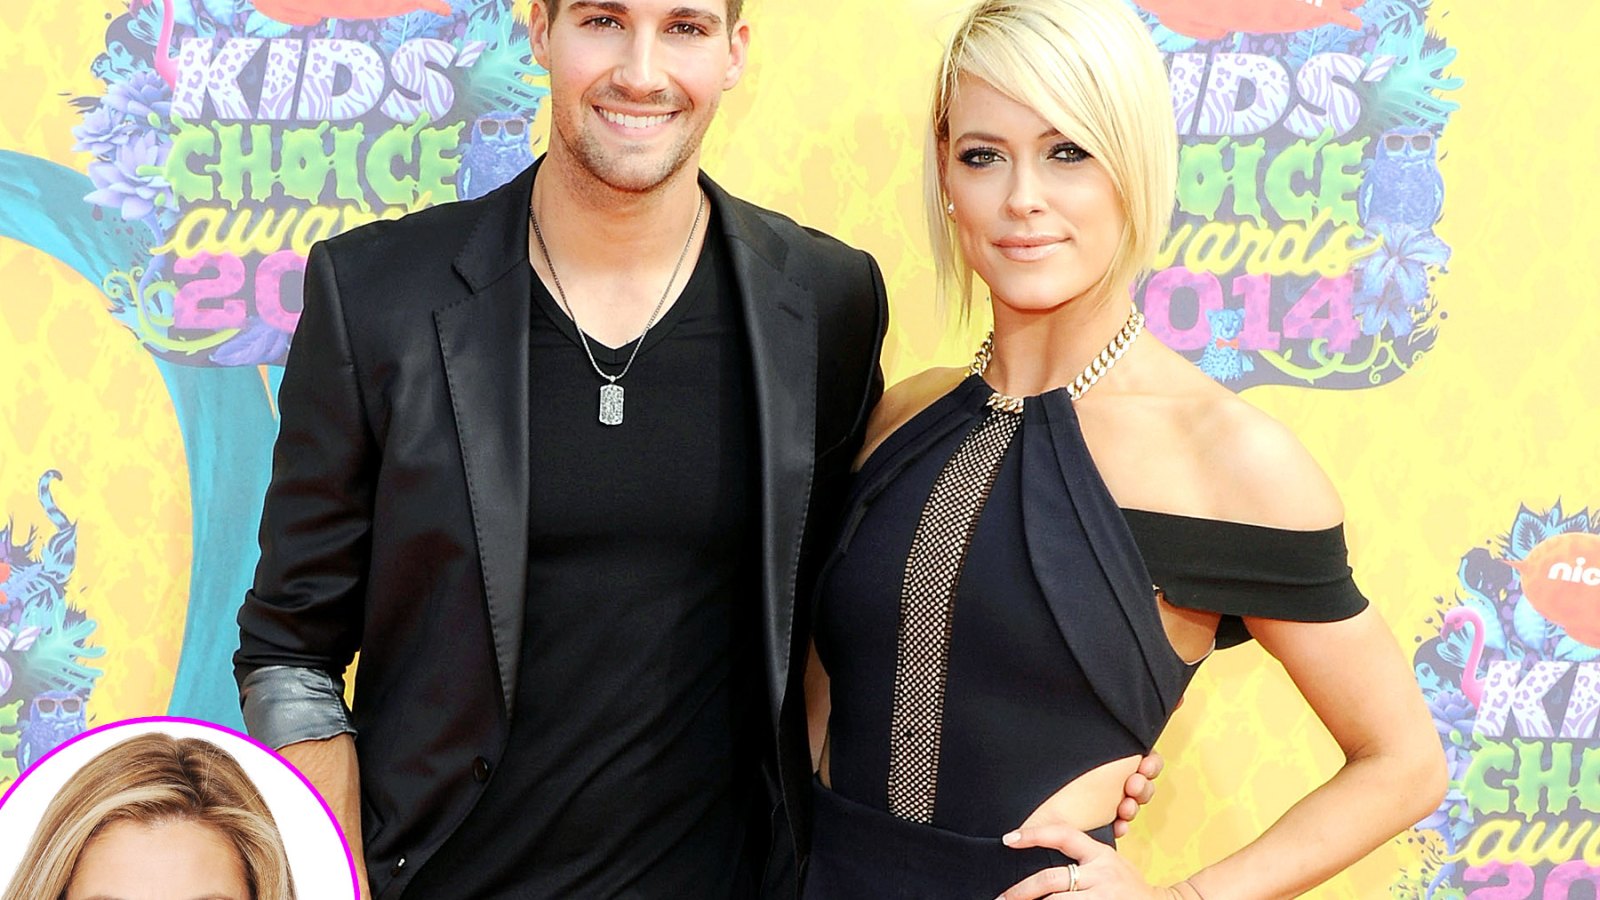 James Maslow and Peta Murgatroyd attend an event on March 29, 2014